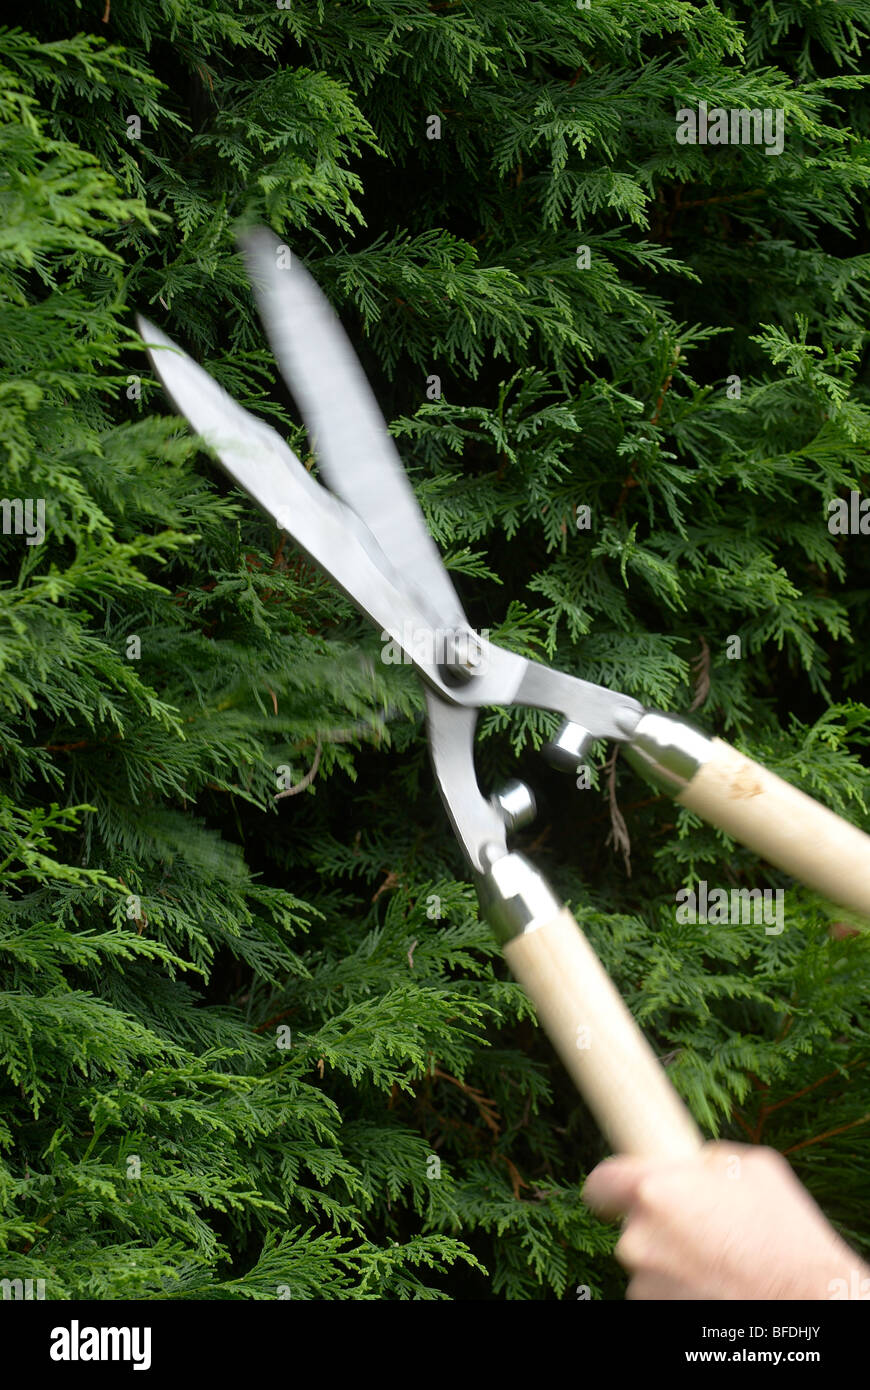 Leylandii hedge being cut with shears Stock Photo